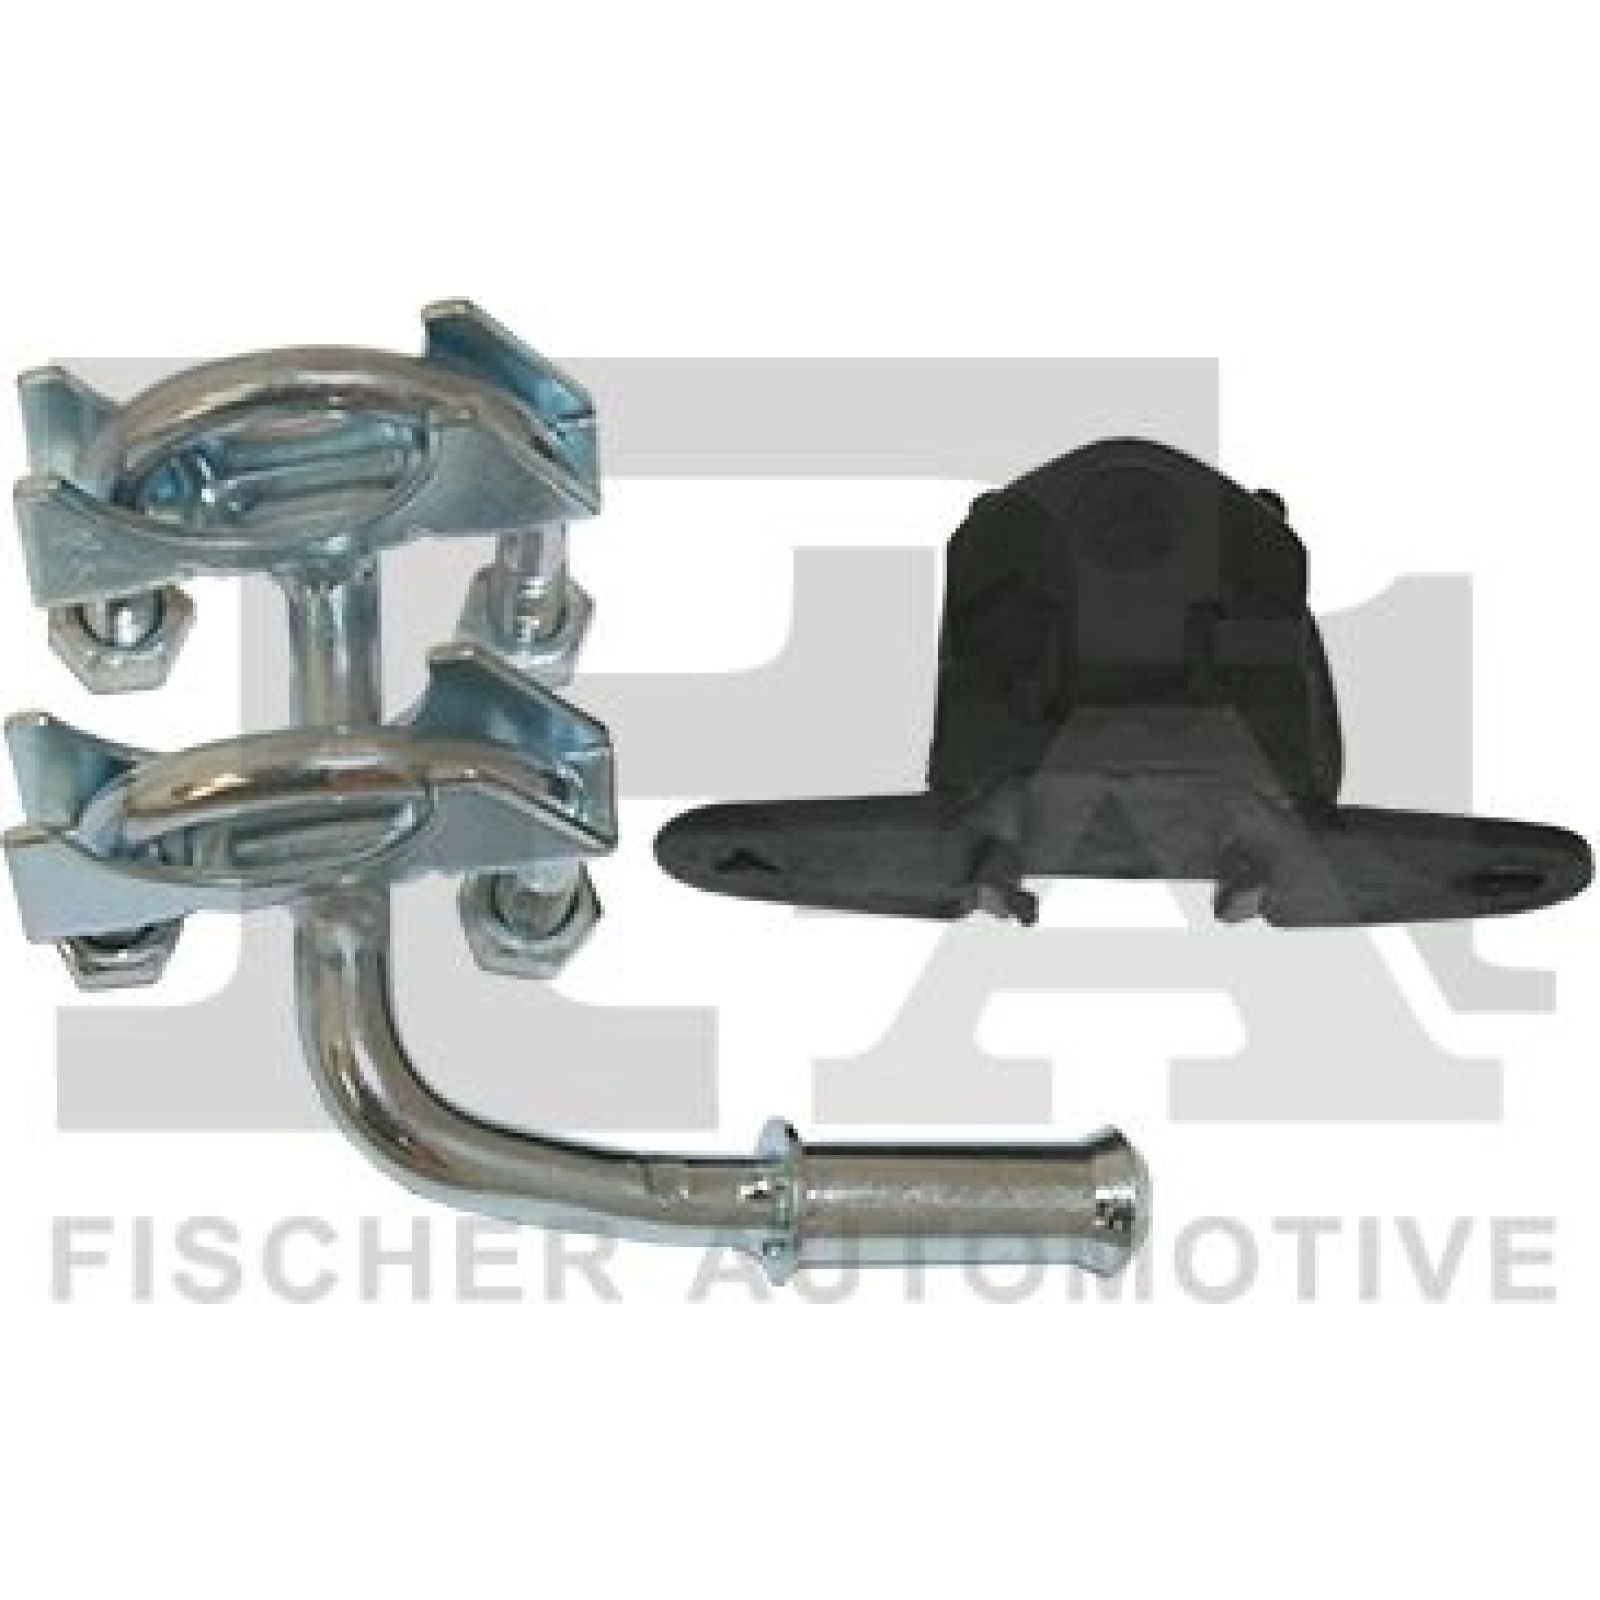 https://www.autoteile-store.at/img/product/halter-schalldaempfer-218-923-553089/9ca264059ad90daf7e978676d30308bd_1600.jpg